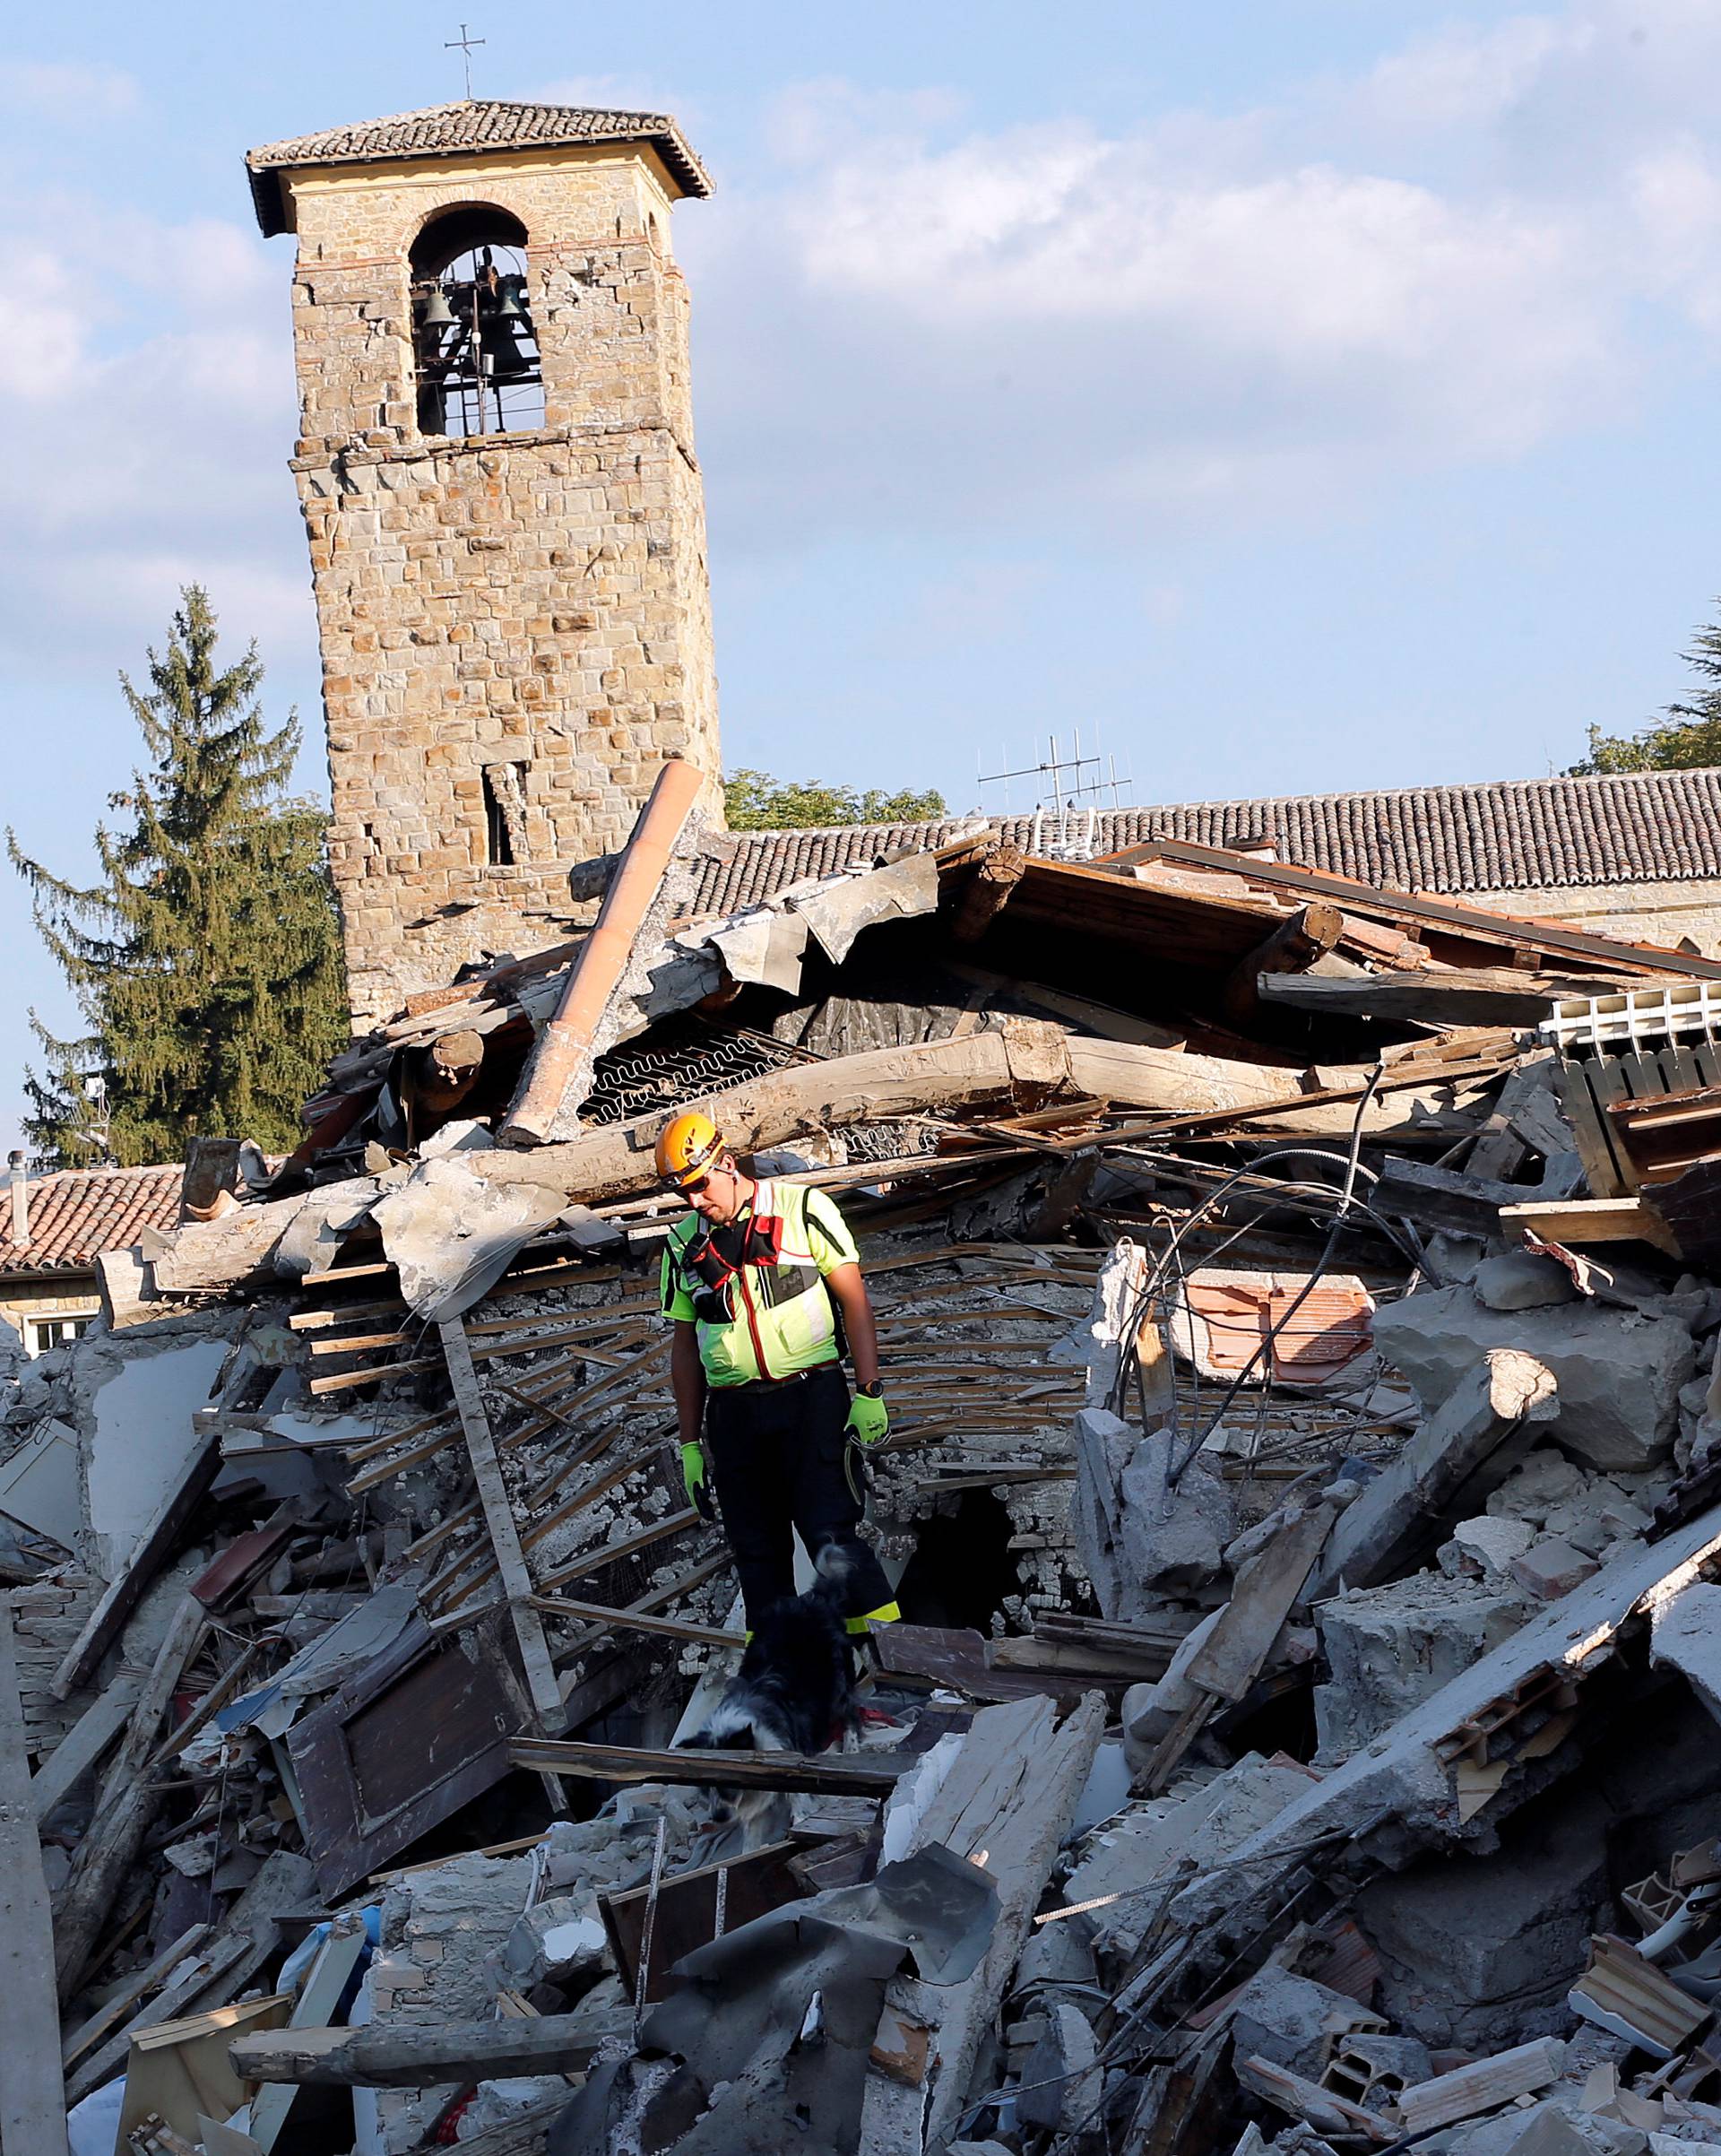 A rescue worker and a dog search among debris following an earthquake in Amatrice